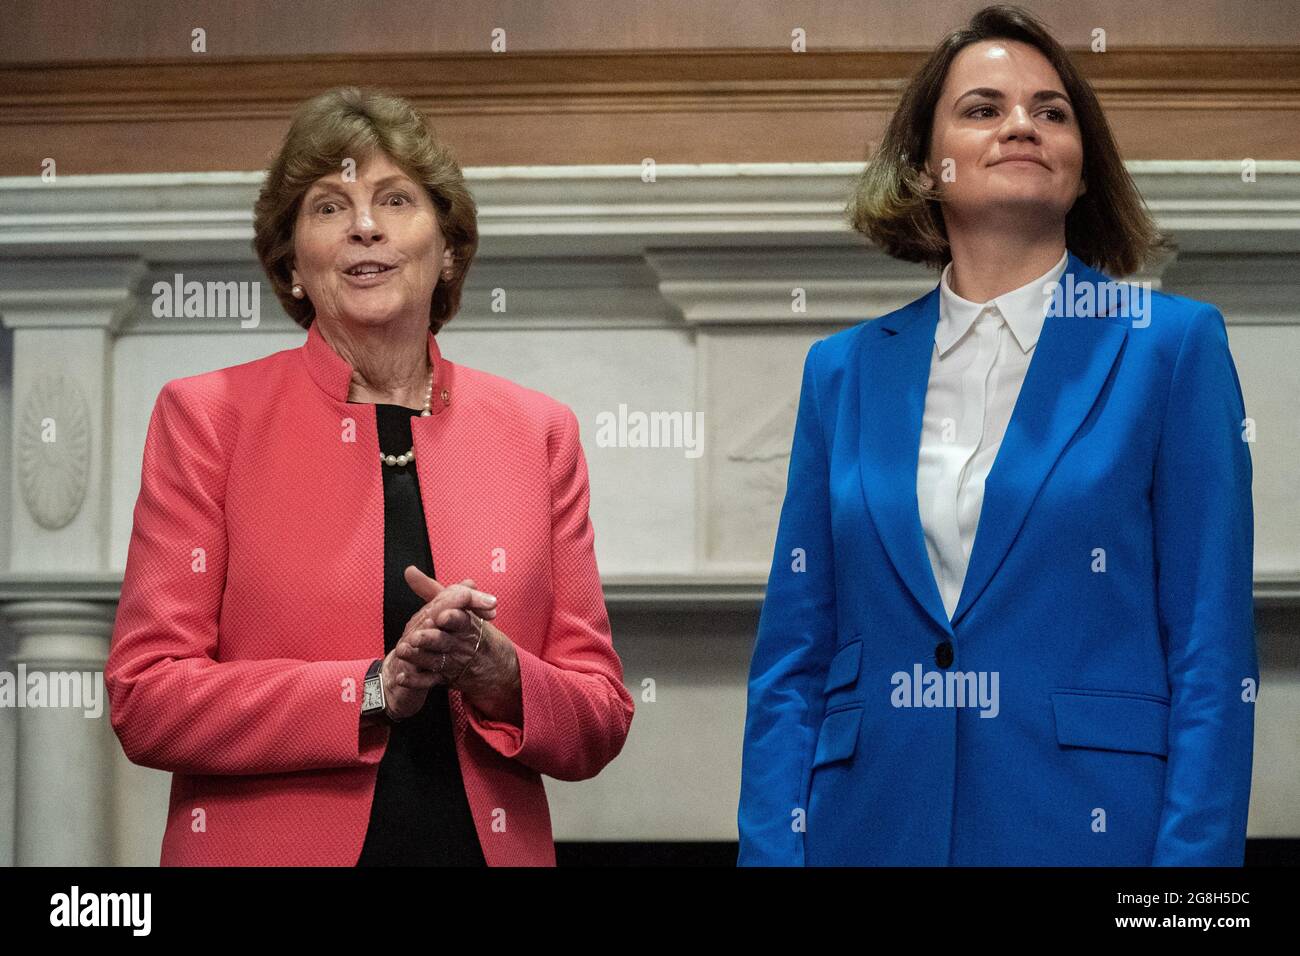 Washington, United States. 20th July, 2021. Sen. Jeanne Shaheen D-NH, left, speaks with Belarus opposition leader Sviatlana Tsikhanouskaya, right, in the Mansfield Room of the U.S. Capitol in Washington, DC on Tuesday, July 20, 2021. Photo by Ken Cedeno/UPI Credit: UPI/Alamy Live News Stock Photo